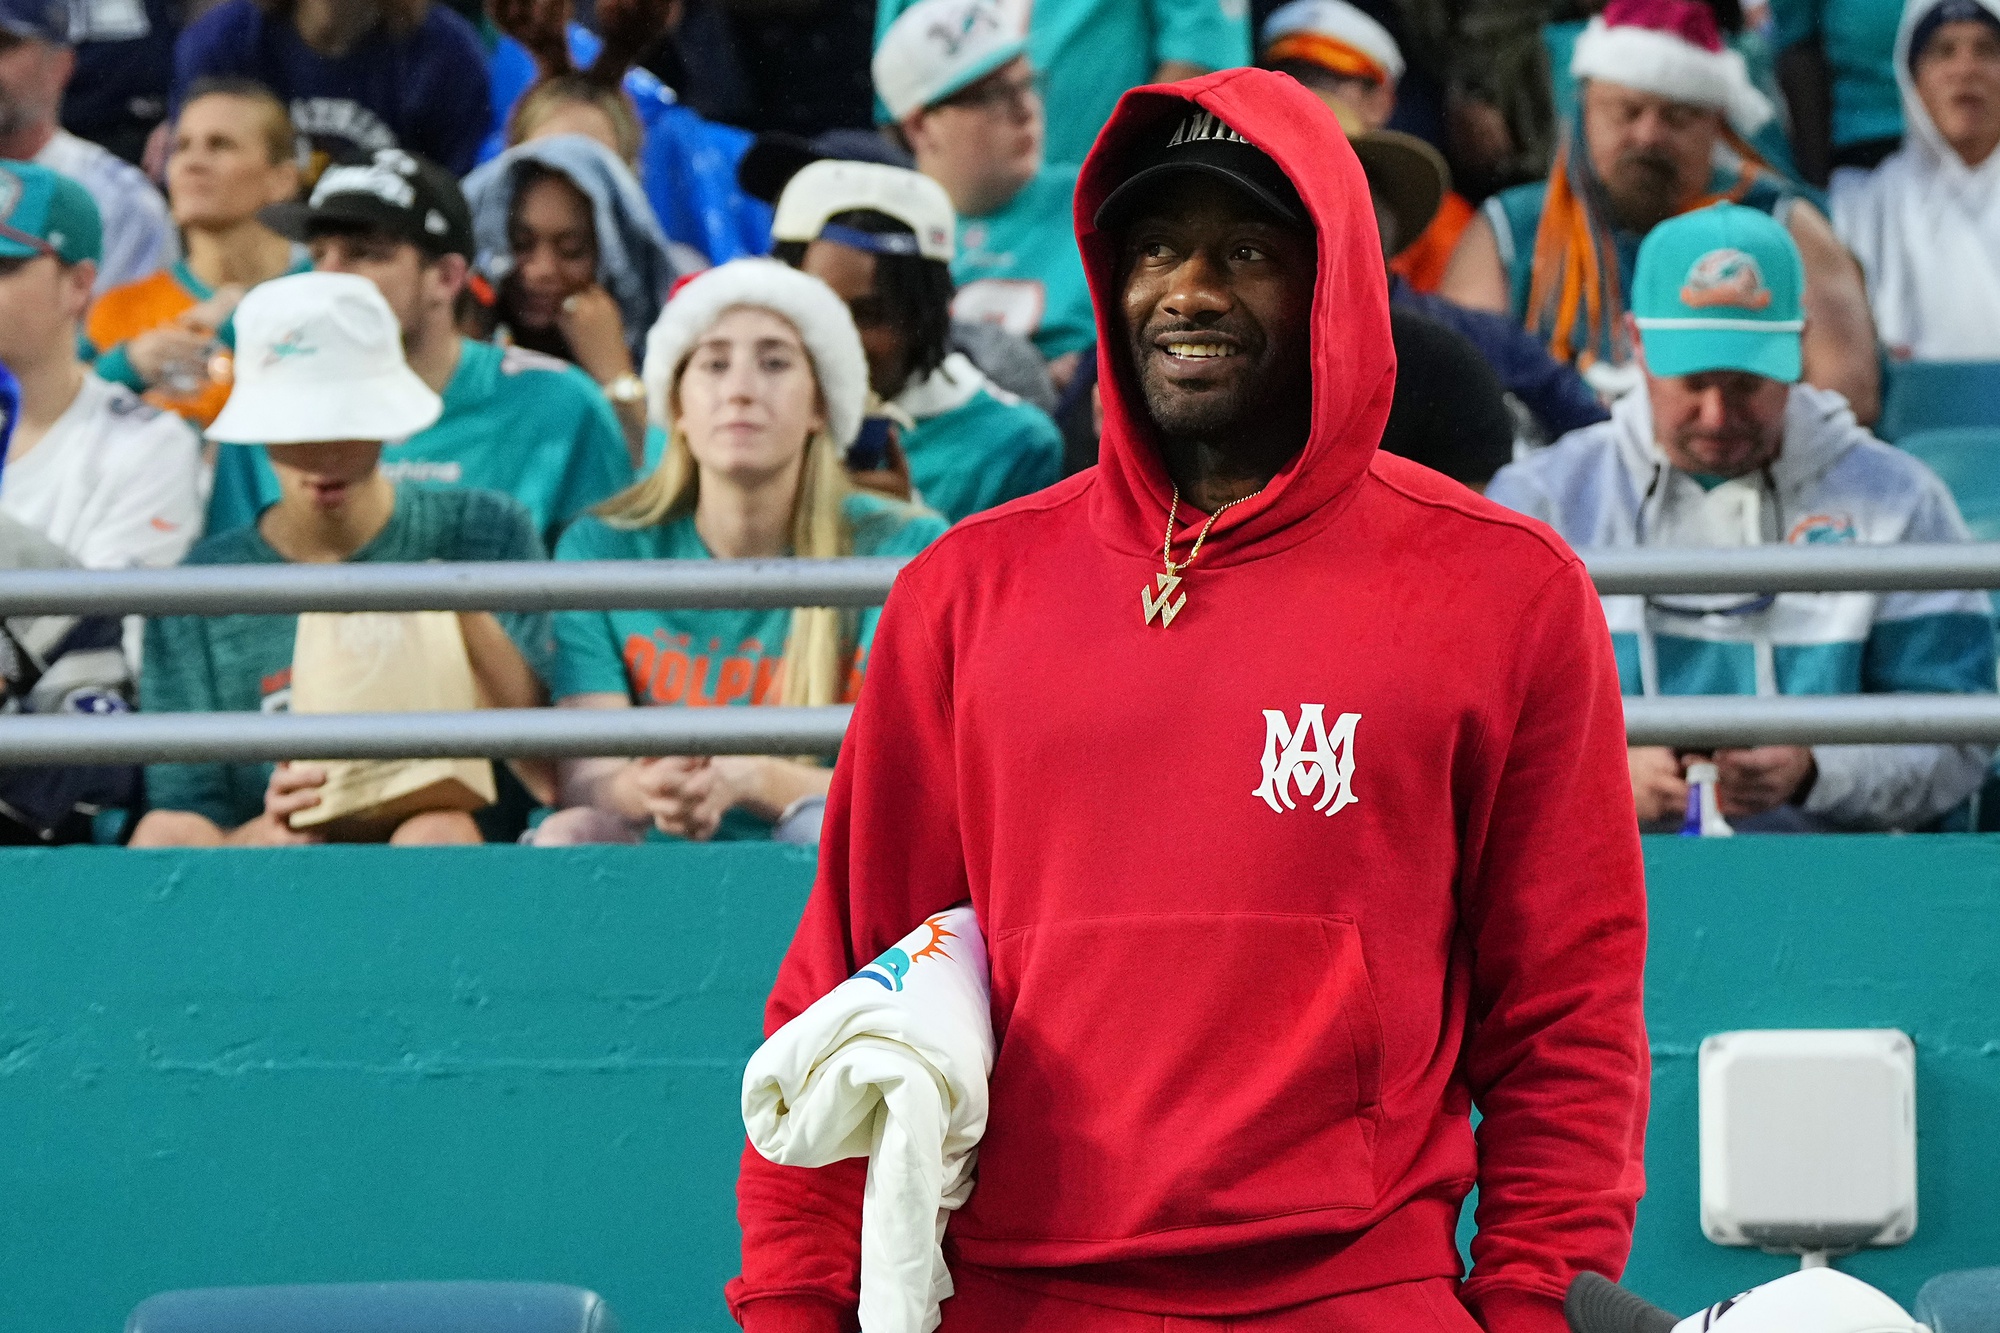 Dec 24, 2023; Miami Gardens, Florida, USA; Los Angeles Clippers guard John Wall watches the game between the Miami Dolphins and the Dallas Cowboys during the first half at Hard Rock Stadium. Mandatory Credit: Jasen Vinlove-USA TODAY Sports